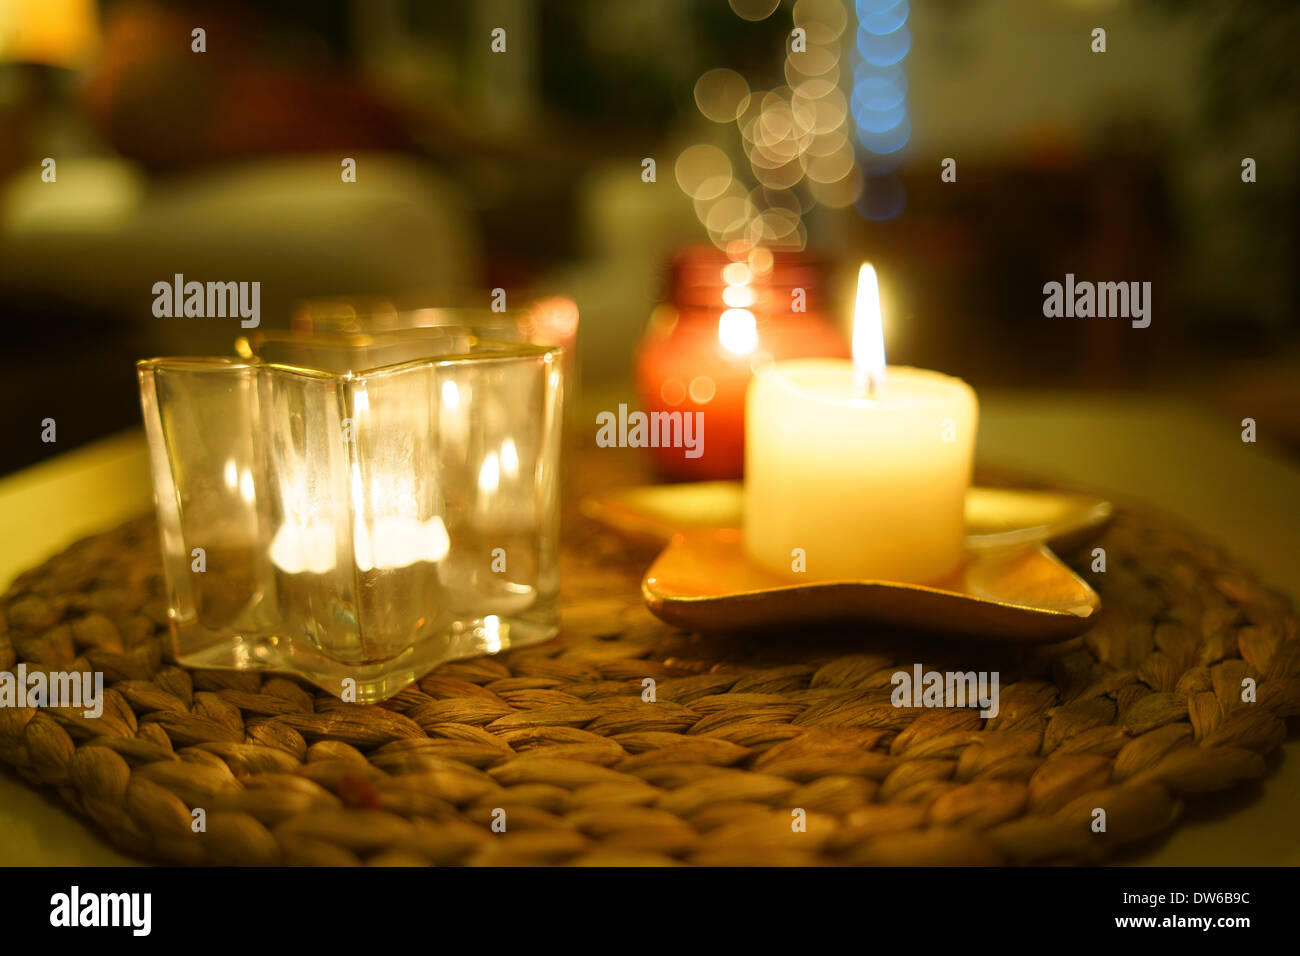 Warm candle light home candles burning Stock Photo